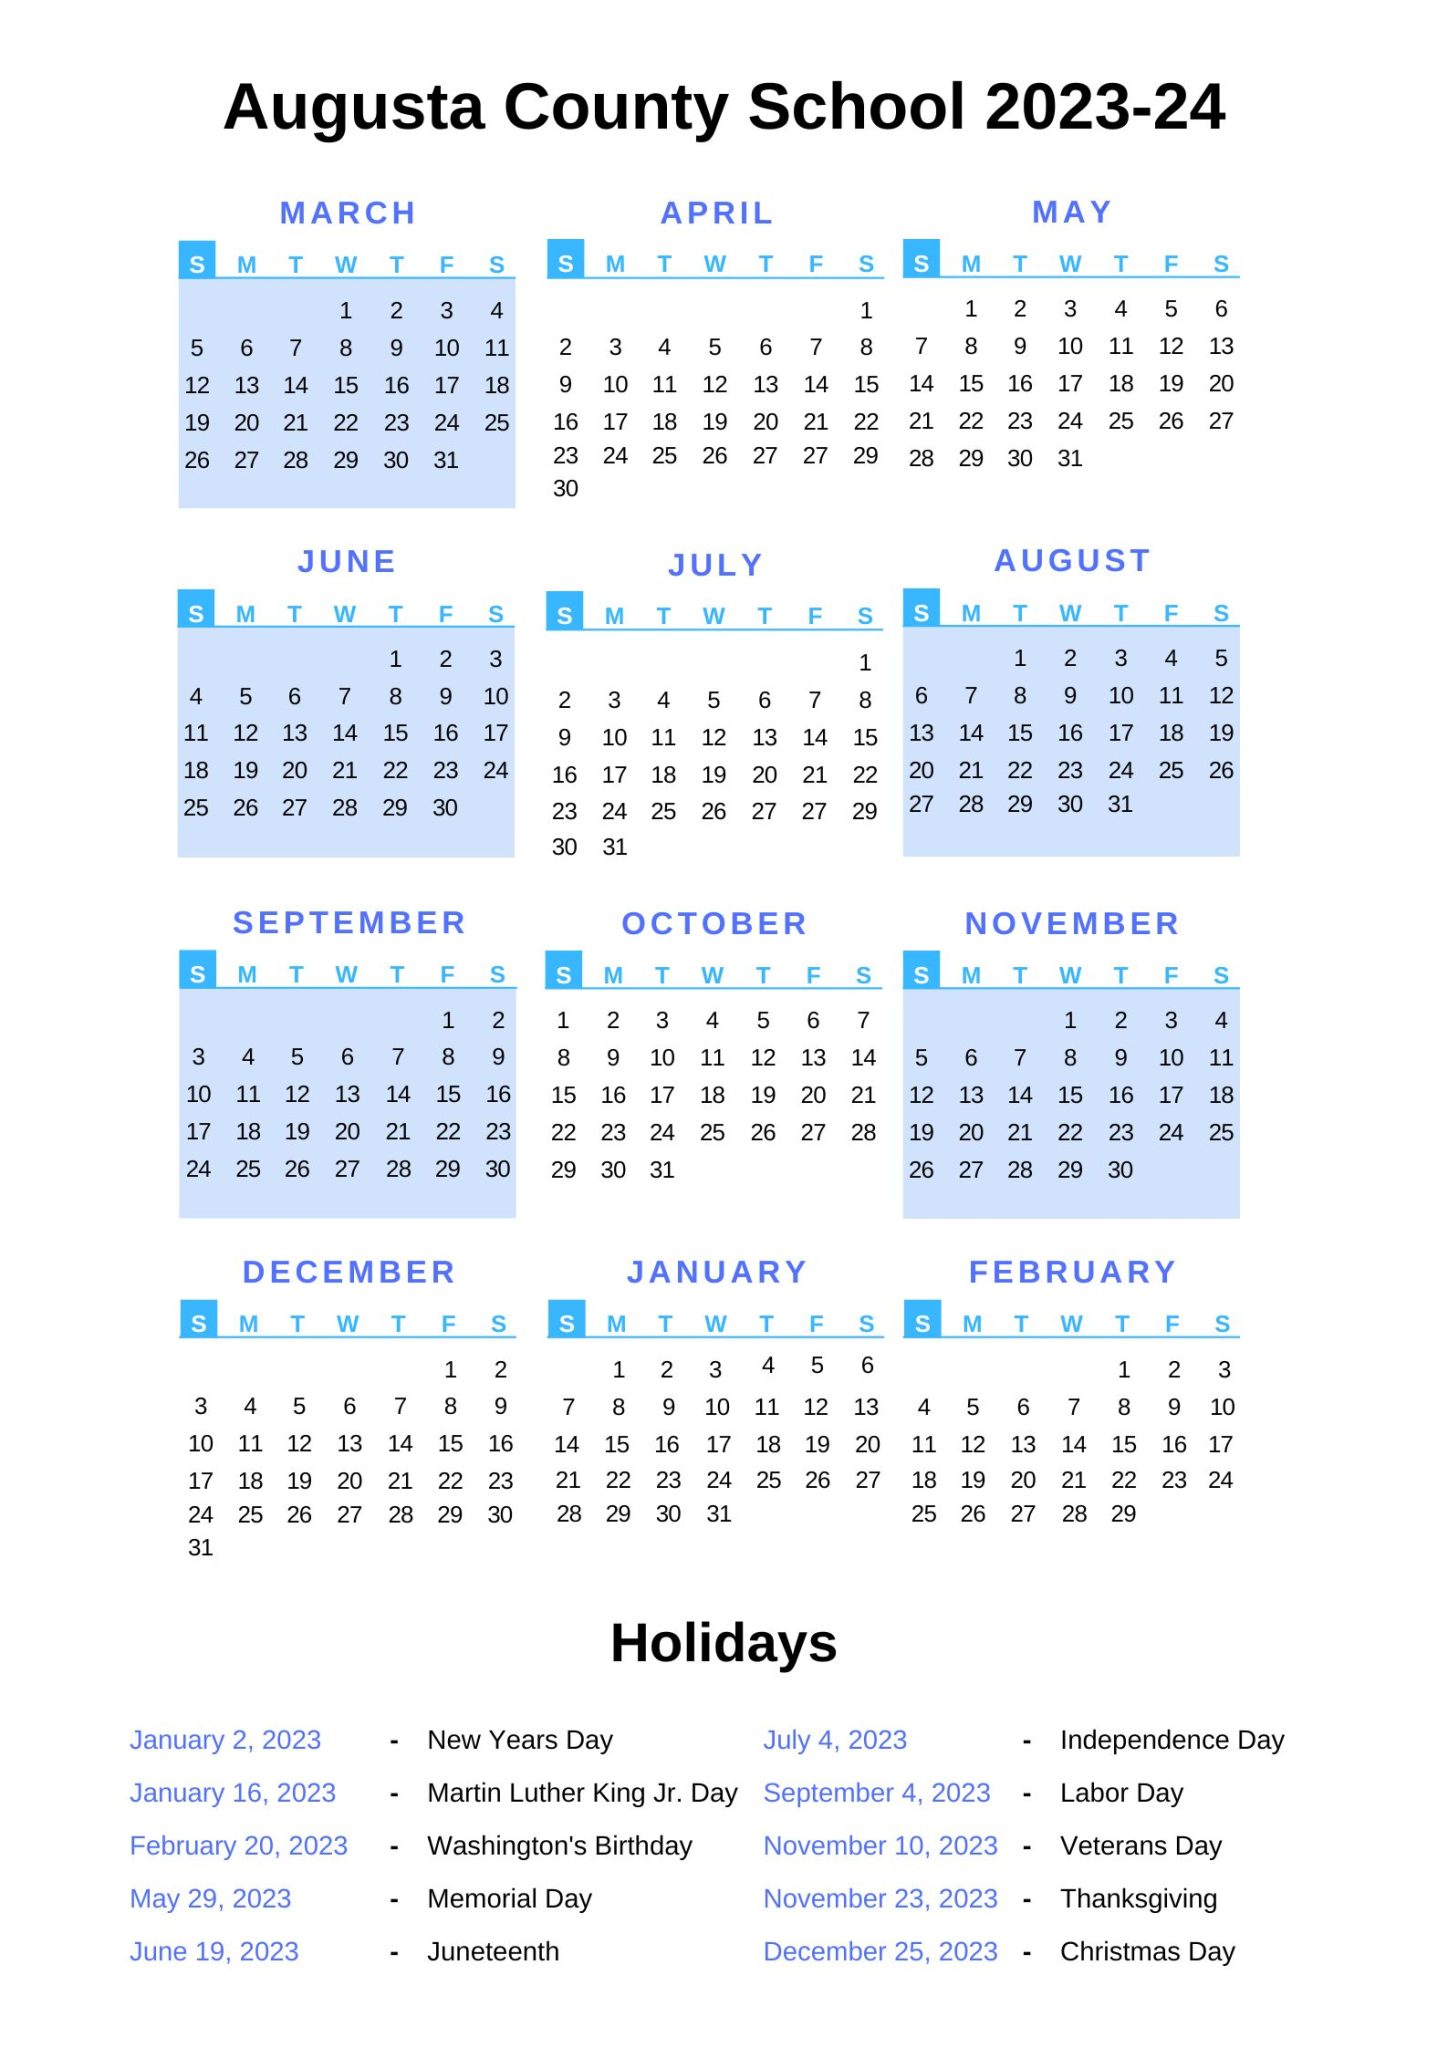 Augusta County Schools Calendar ACPS 2023 24 With Holidays